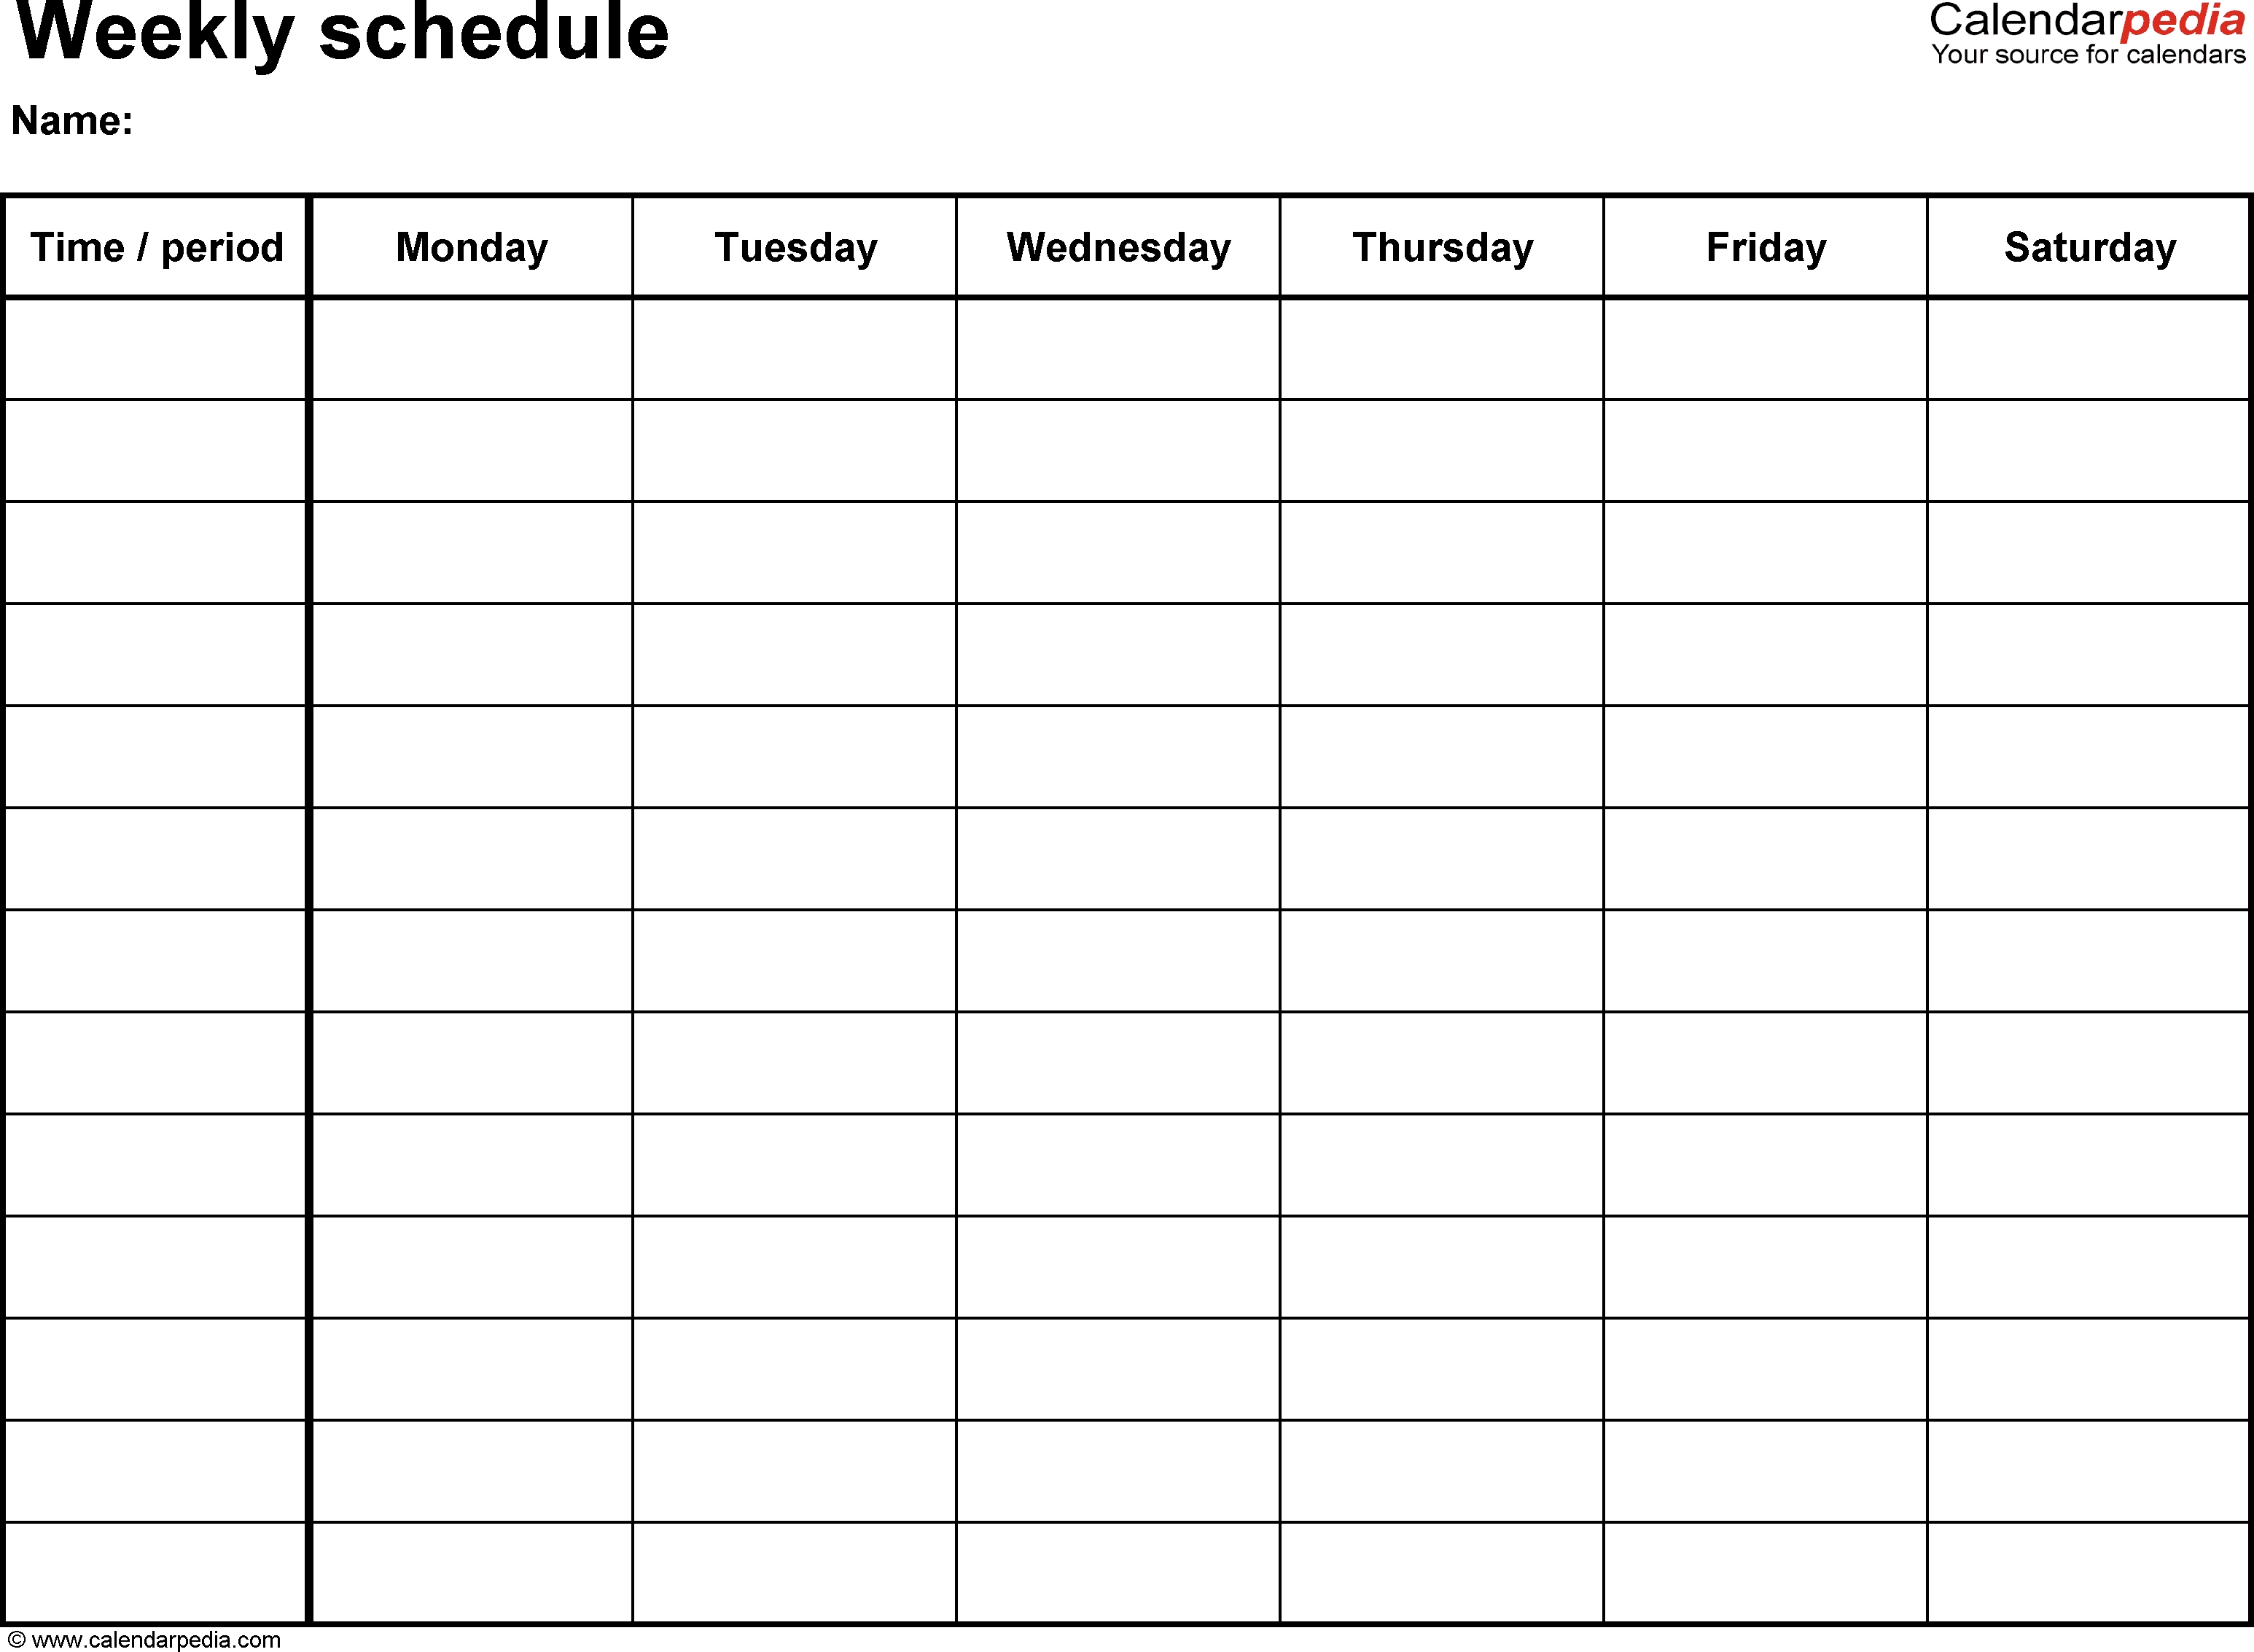 Free Weekly Schedule Templates For Word - 18 Templates-Blank Calendar Page Monday To Friday